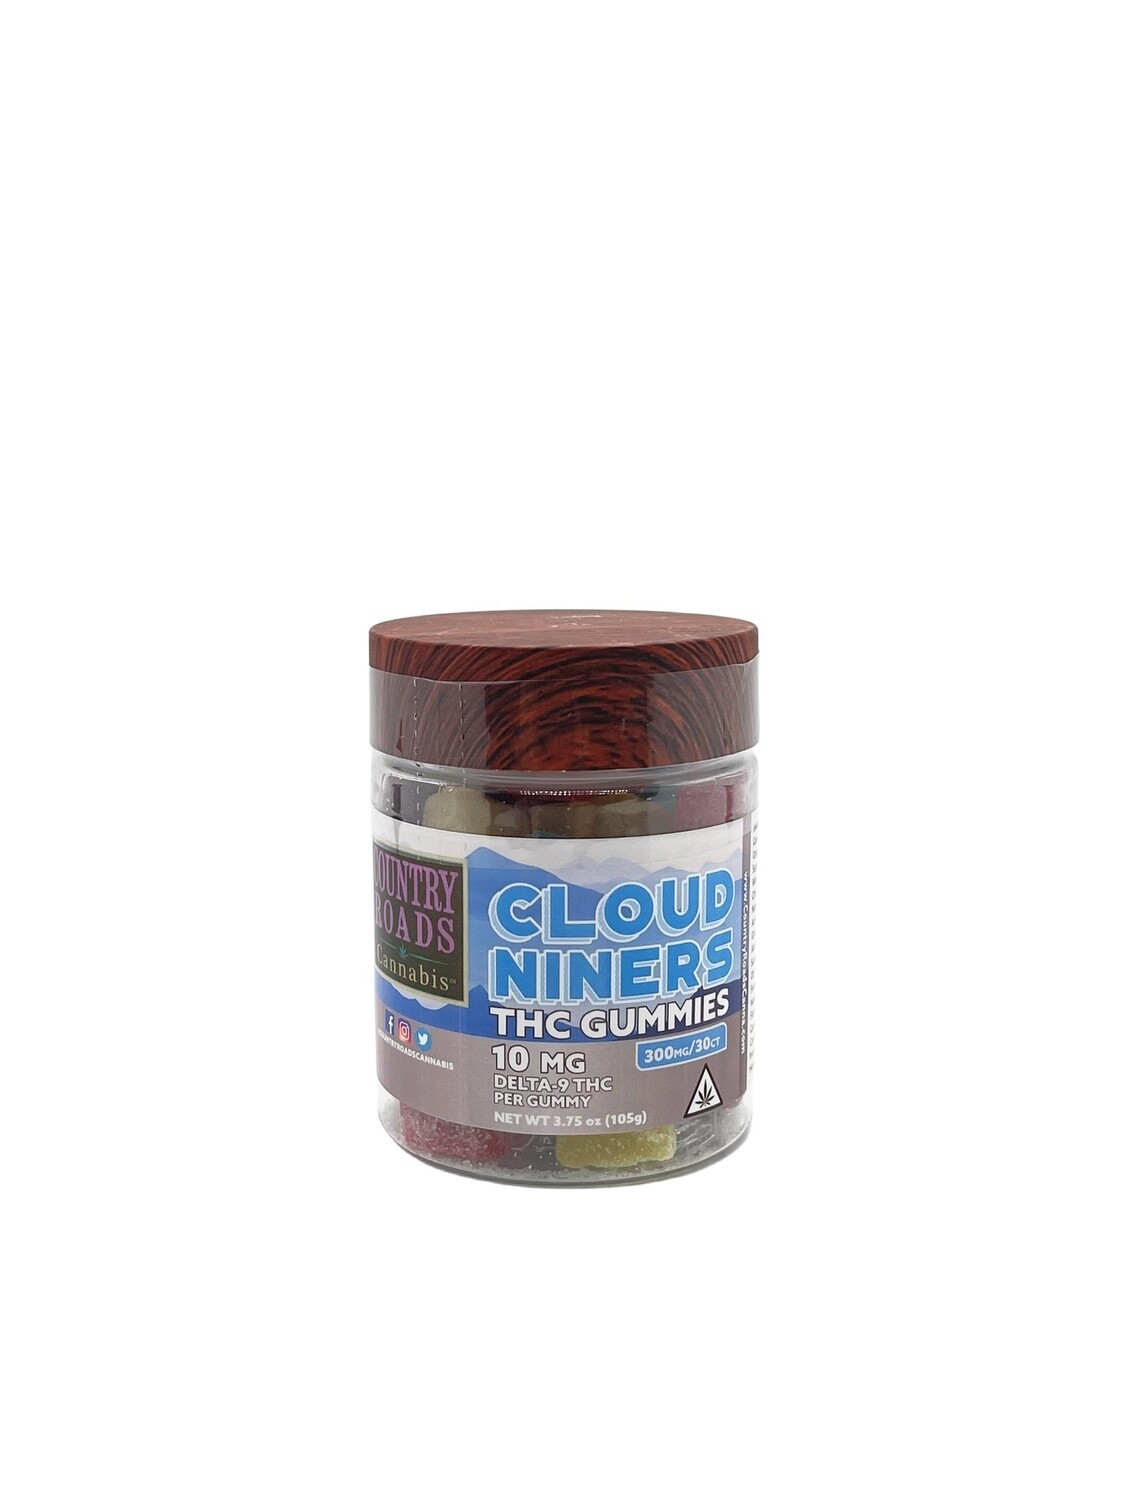 Country Roads: Cloud Niners Delta 9 THC Gummies